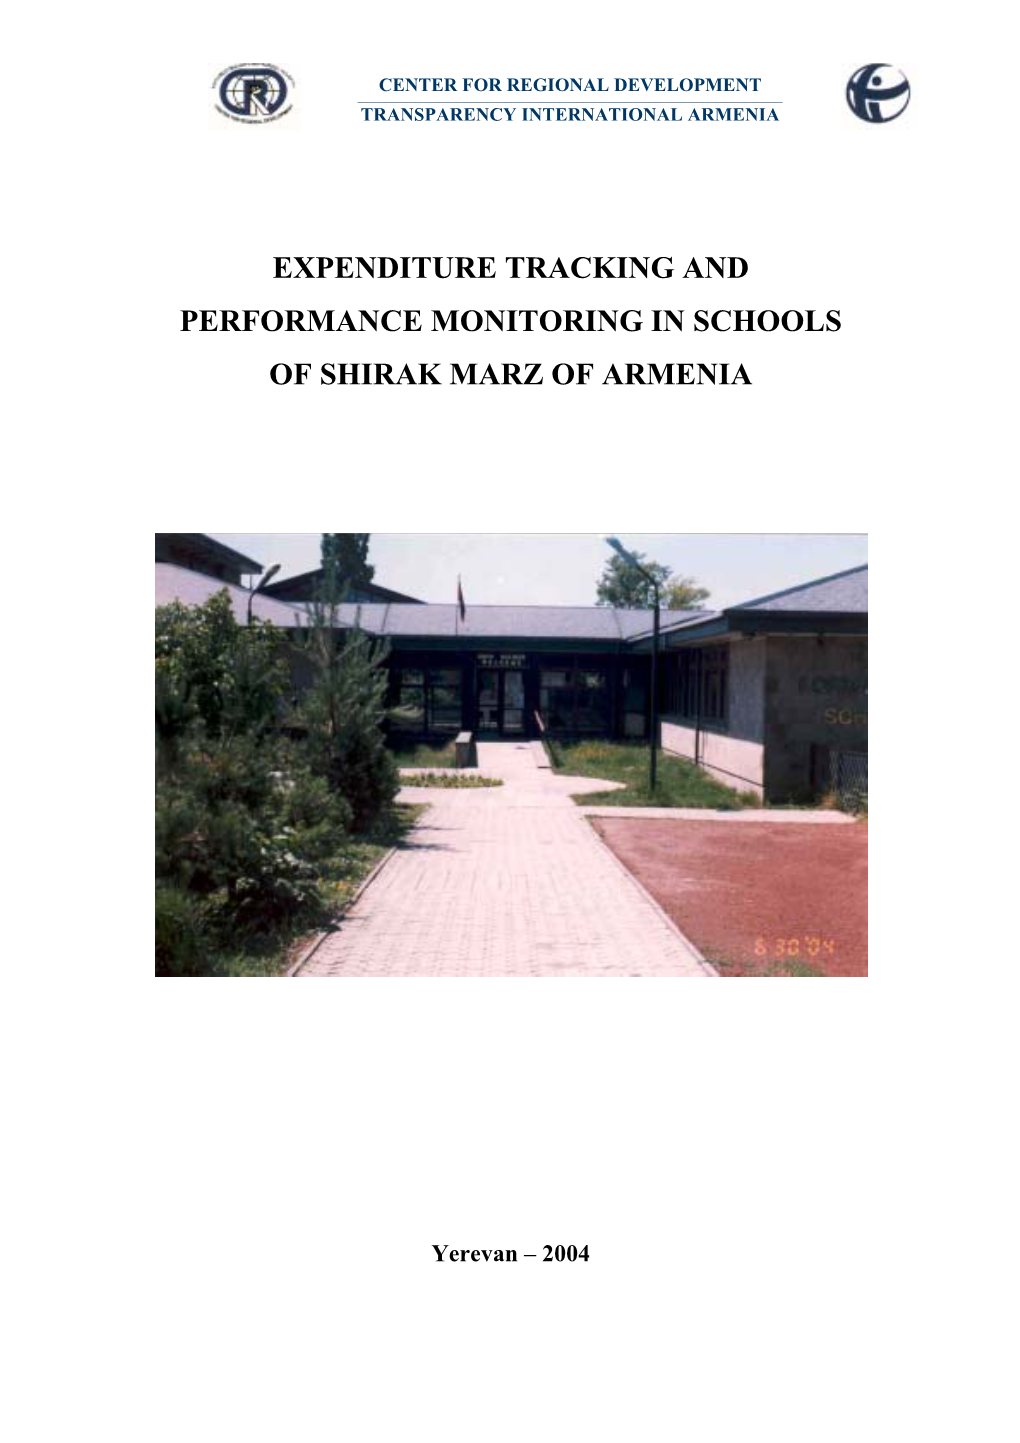 Expenditure Tracking and Performance Monitoring in Schools of Shirak Marz of Armenia